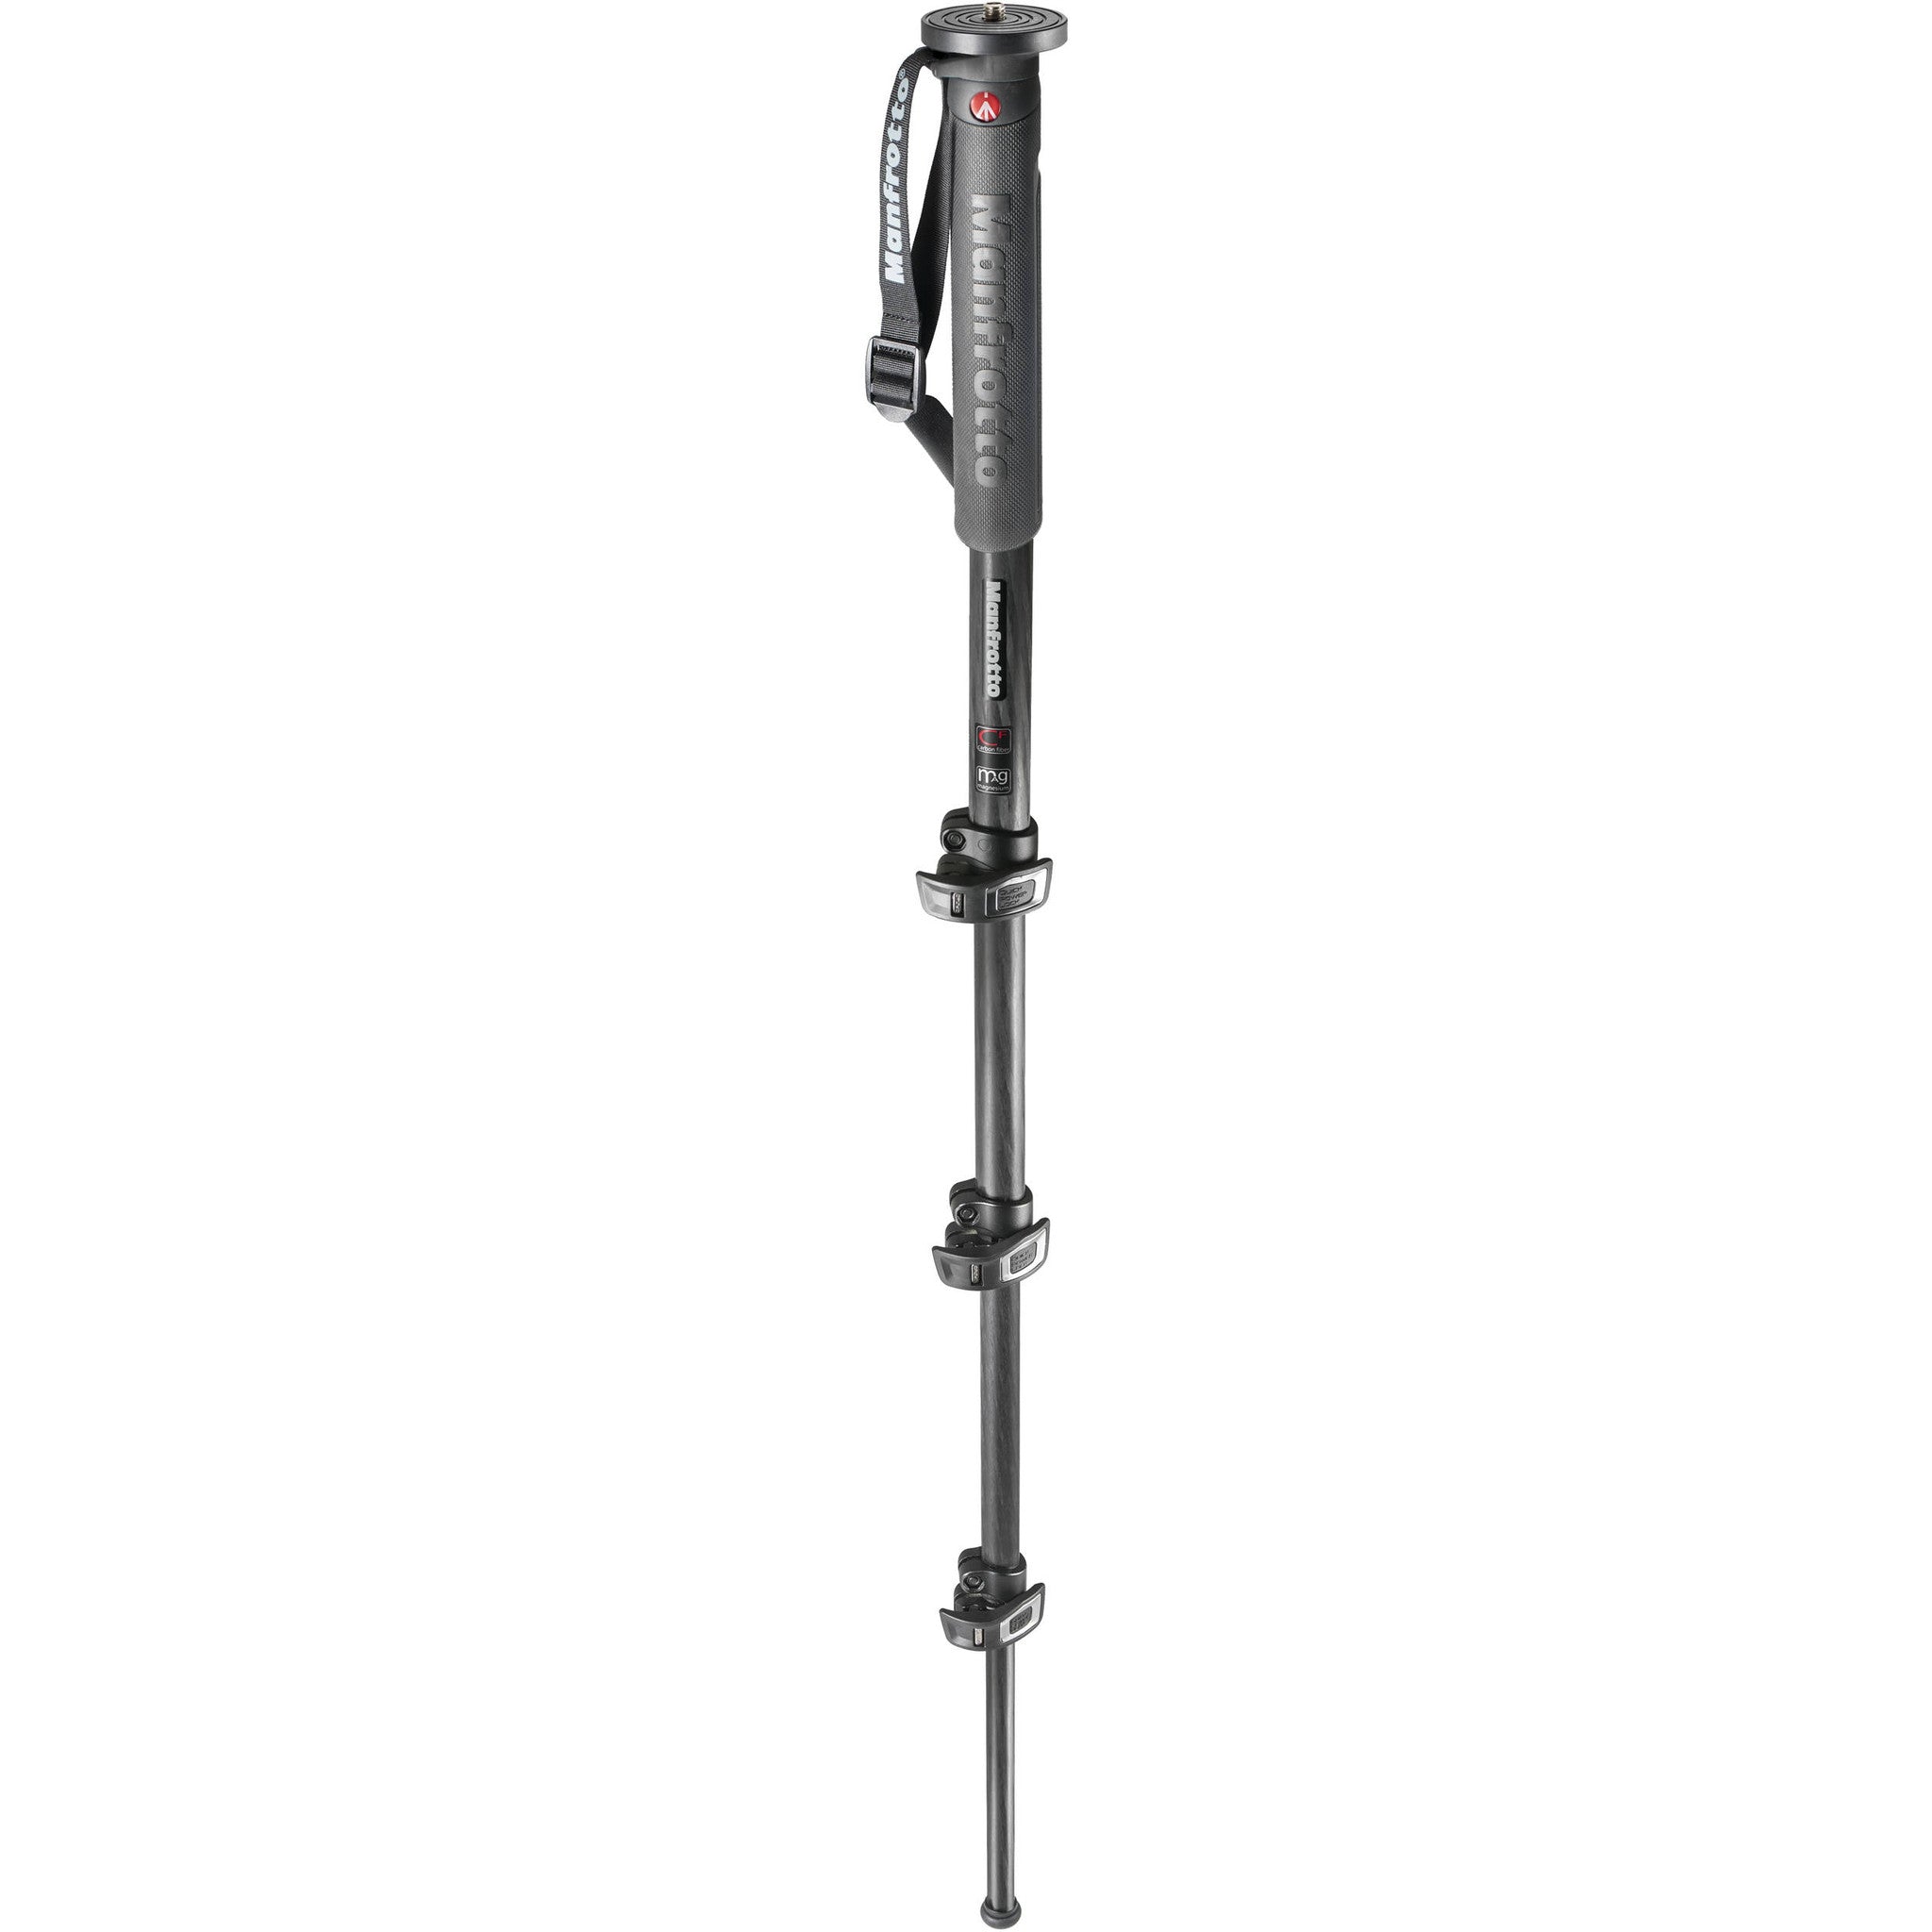 Manfrotto MMXPROC4US 4-Section Carbon Fiber Monopod, discontinued, Manfrotto - Pictureline 